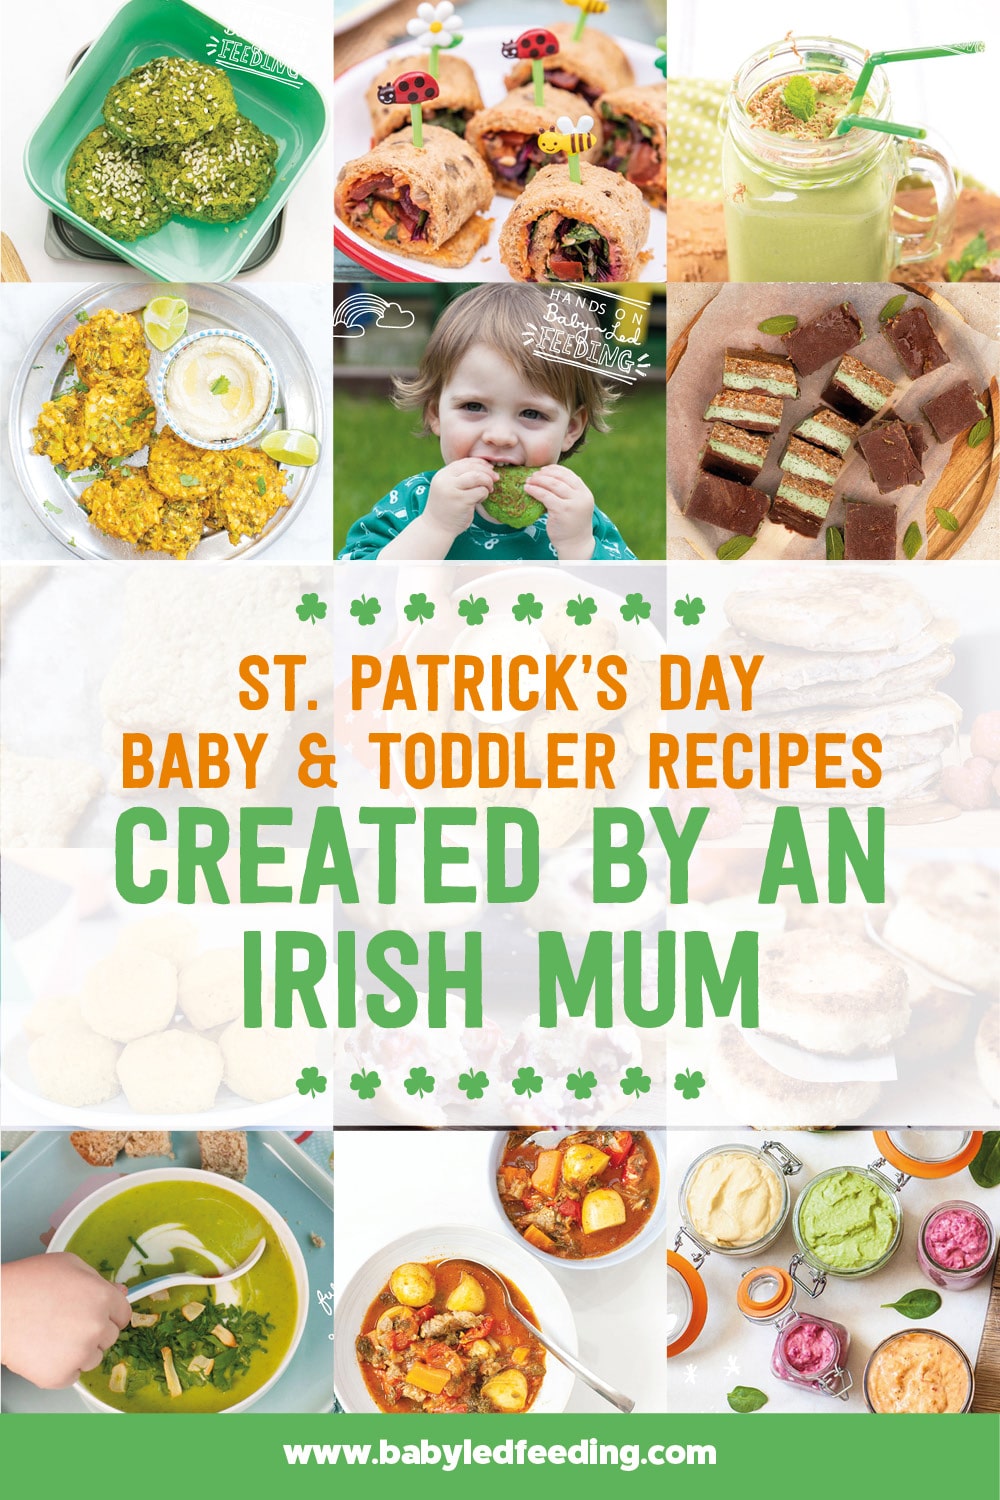 St. Patricks Day Recipes for kids created by an Irish Mum! Healthy recipe that are baby and toddler-friendly. Healthy shamrock shake, veggie-loaded mini cottage pies, refined sugar-free mint chocolate slice, traditional Irish stew, and seafood chowder... Irish party recipe for a fun Saint Patrick's Day! #stpatricksday #Irishfood #irish #kissmeimirish #babyledweaning #kidpartyfood #appetizers